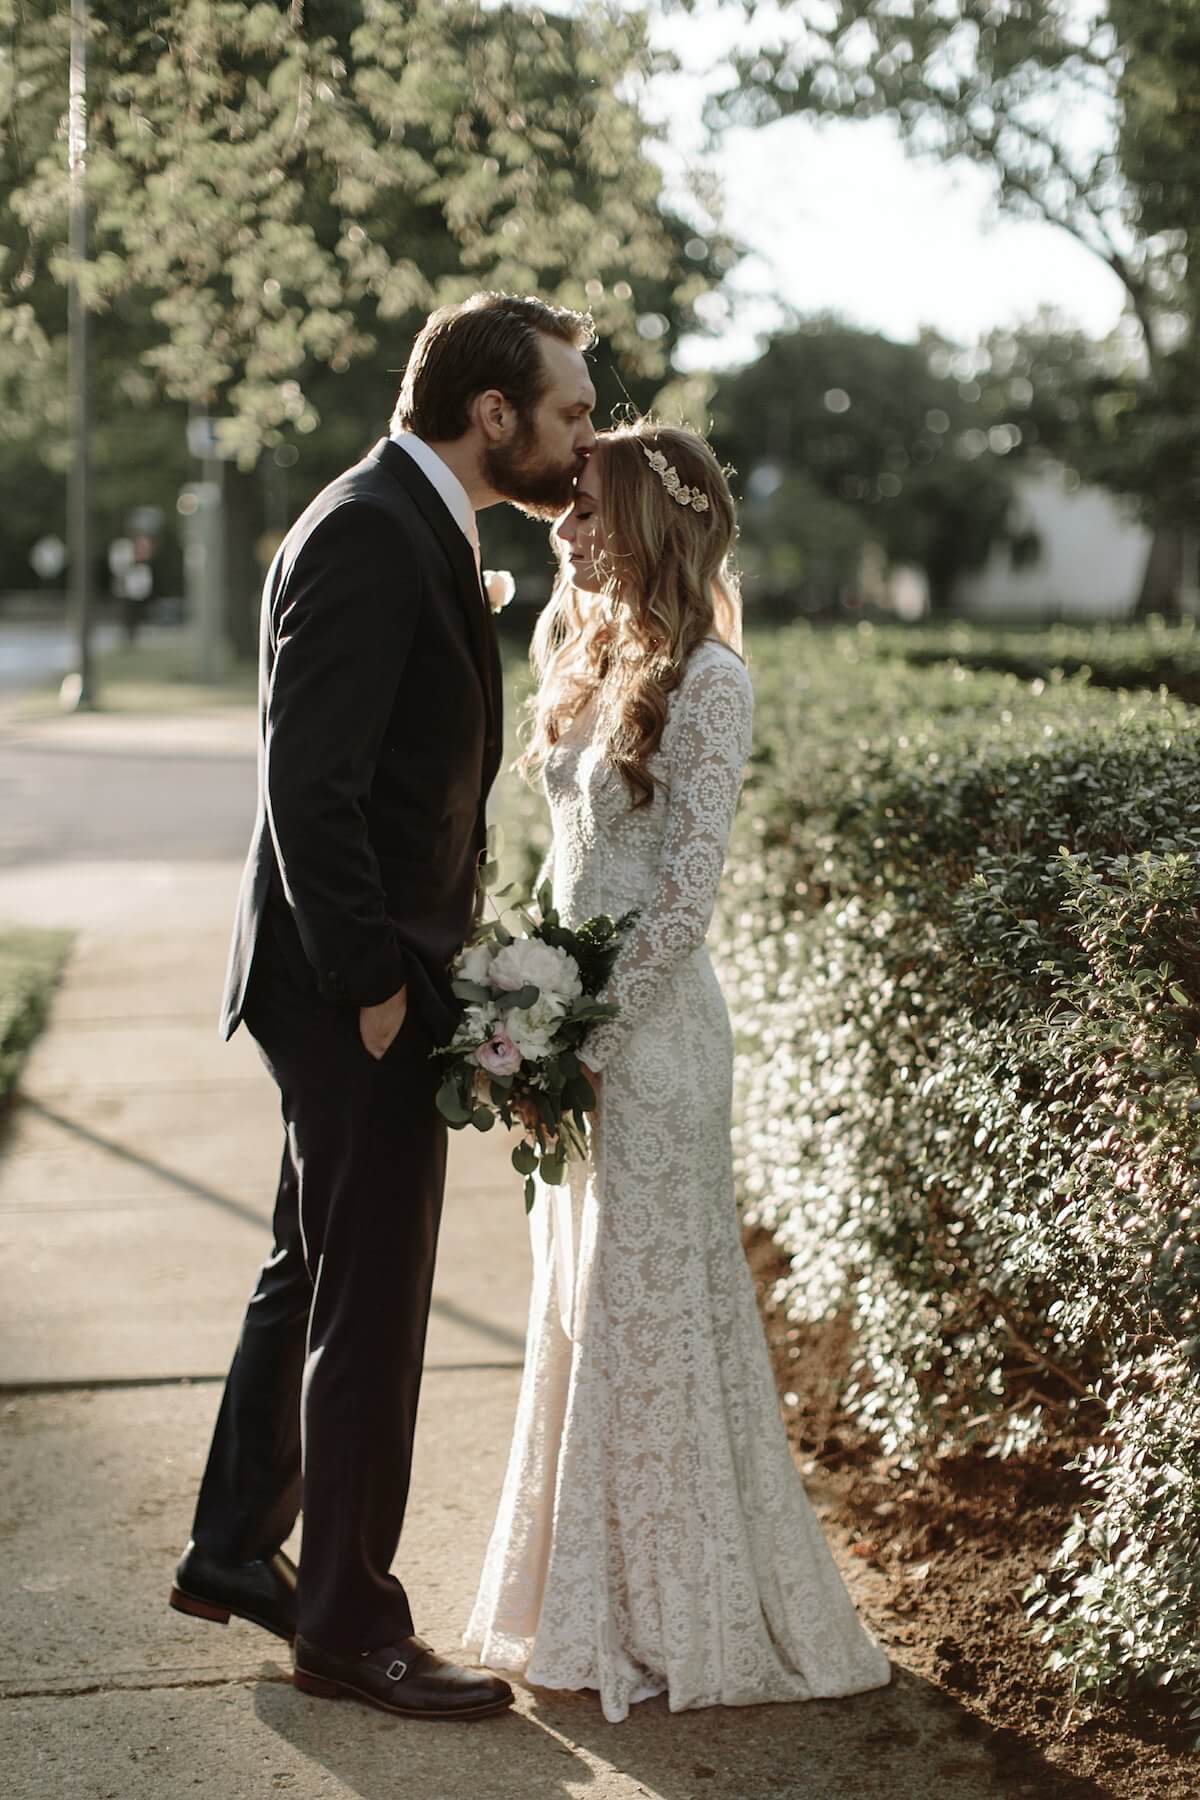 the-forehead-kiss-newly-weds-at-the-glidden-house-boho-wedding-inspiration